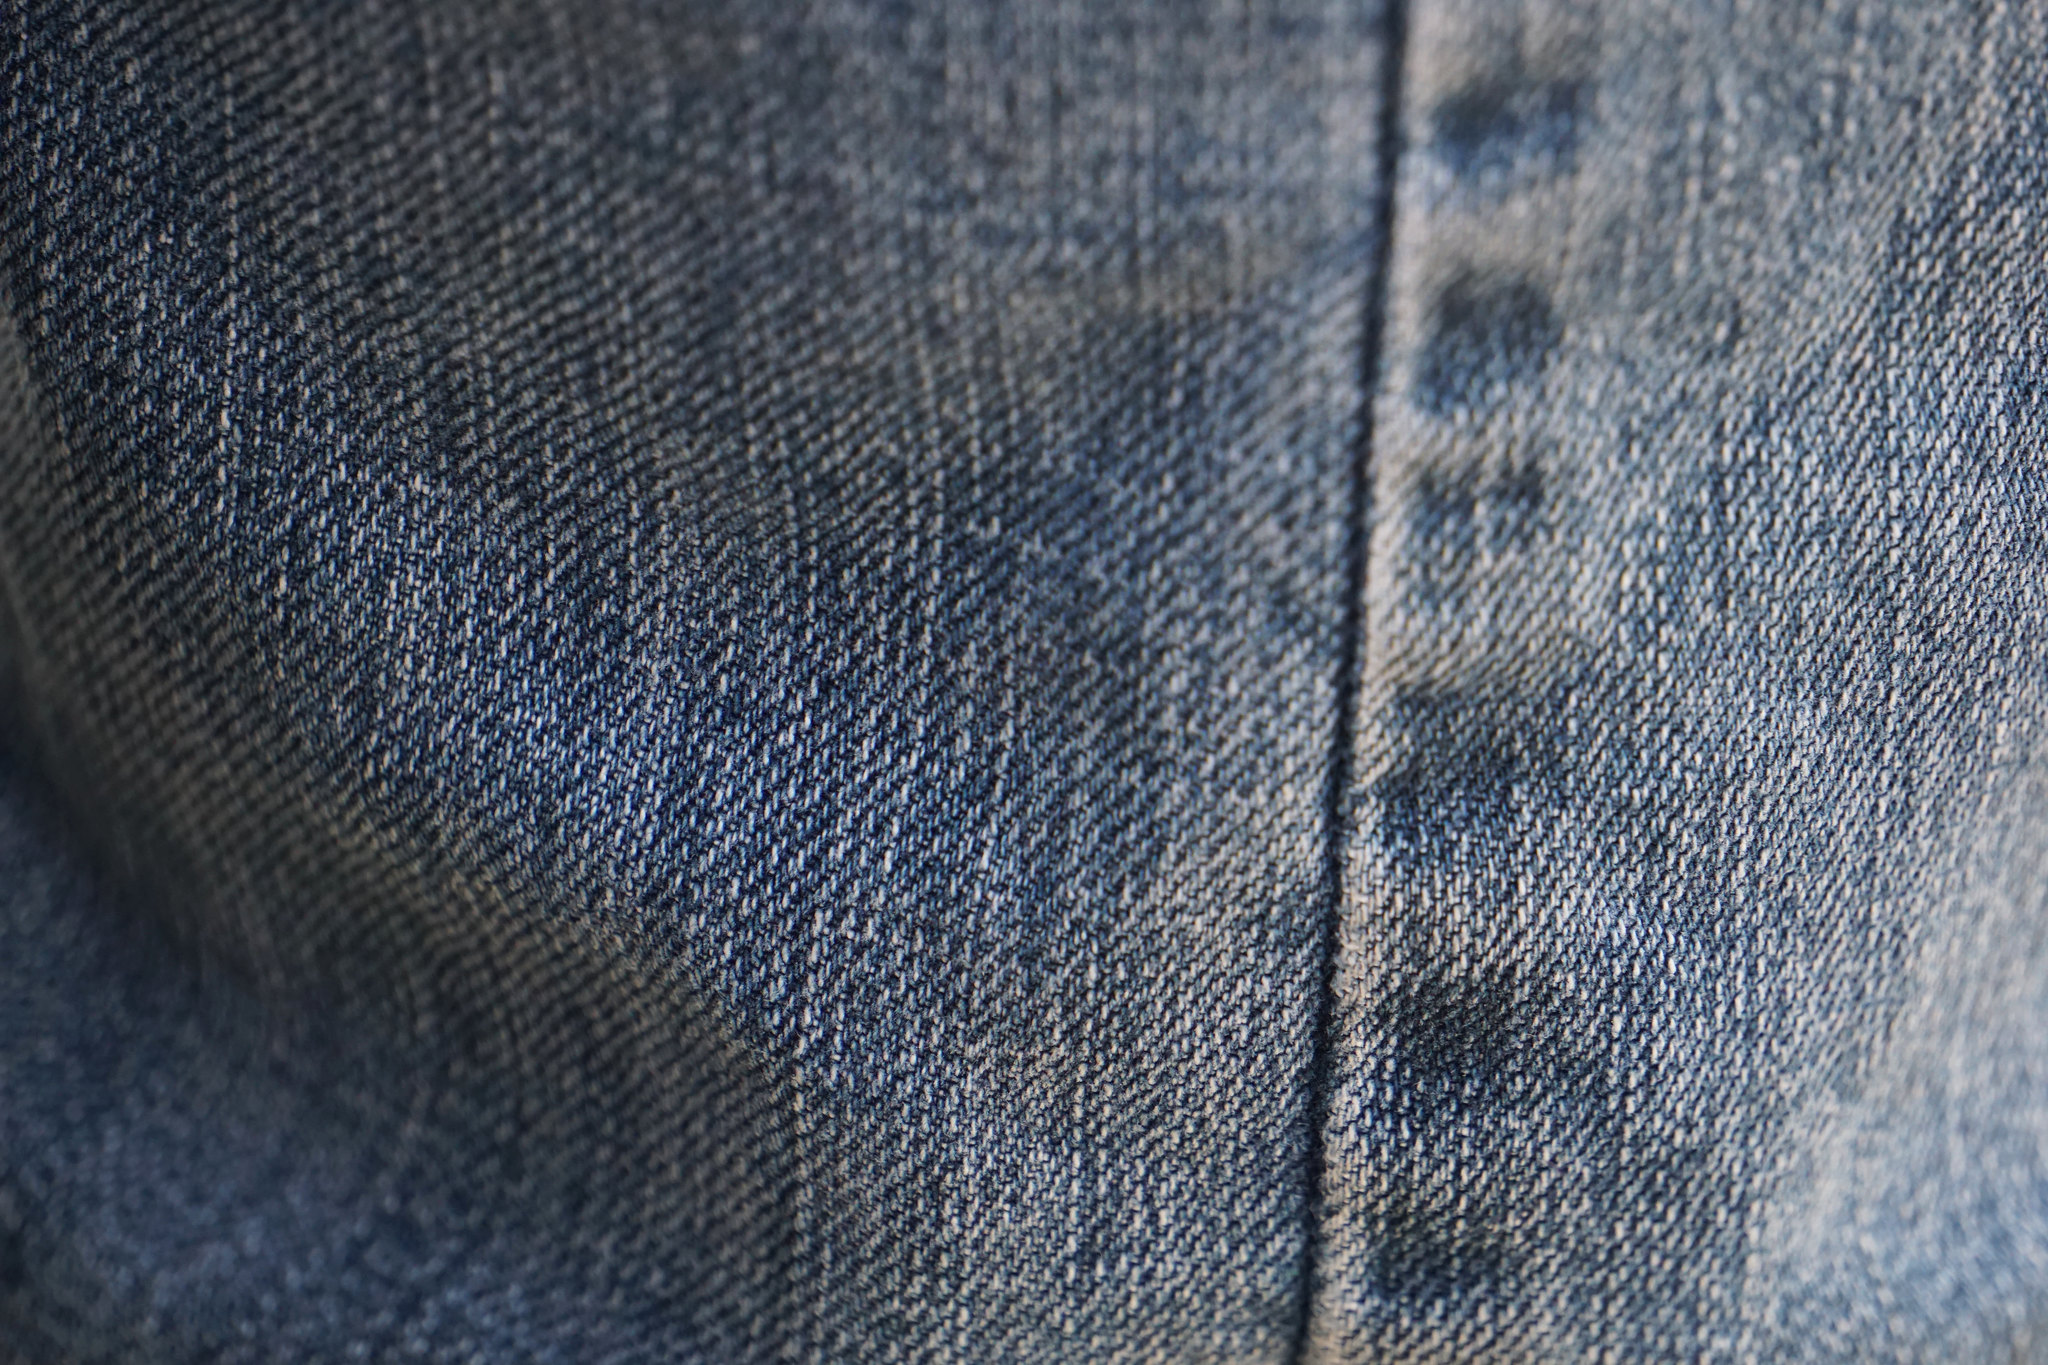 Opdatering vente Hej The wear patterns of your jeans aren't good forensic evidence | Ars Technica